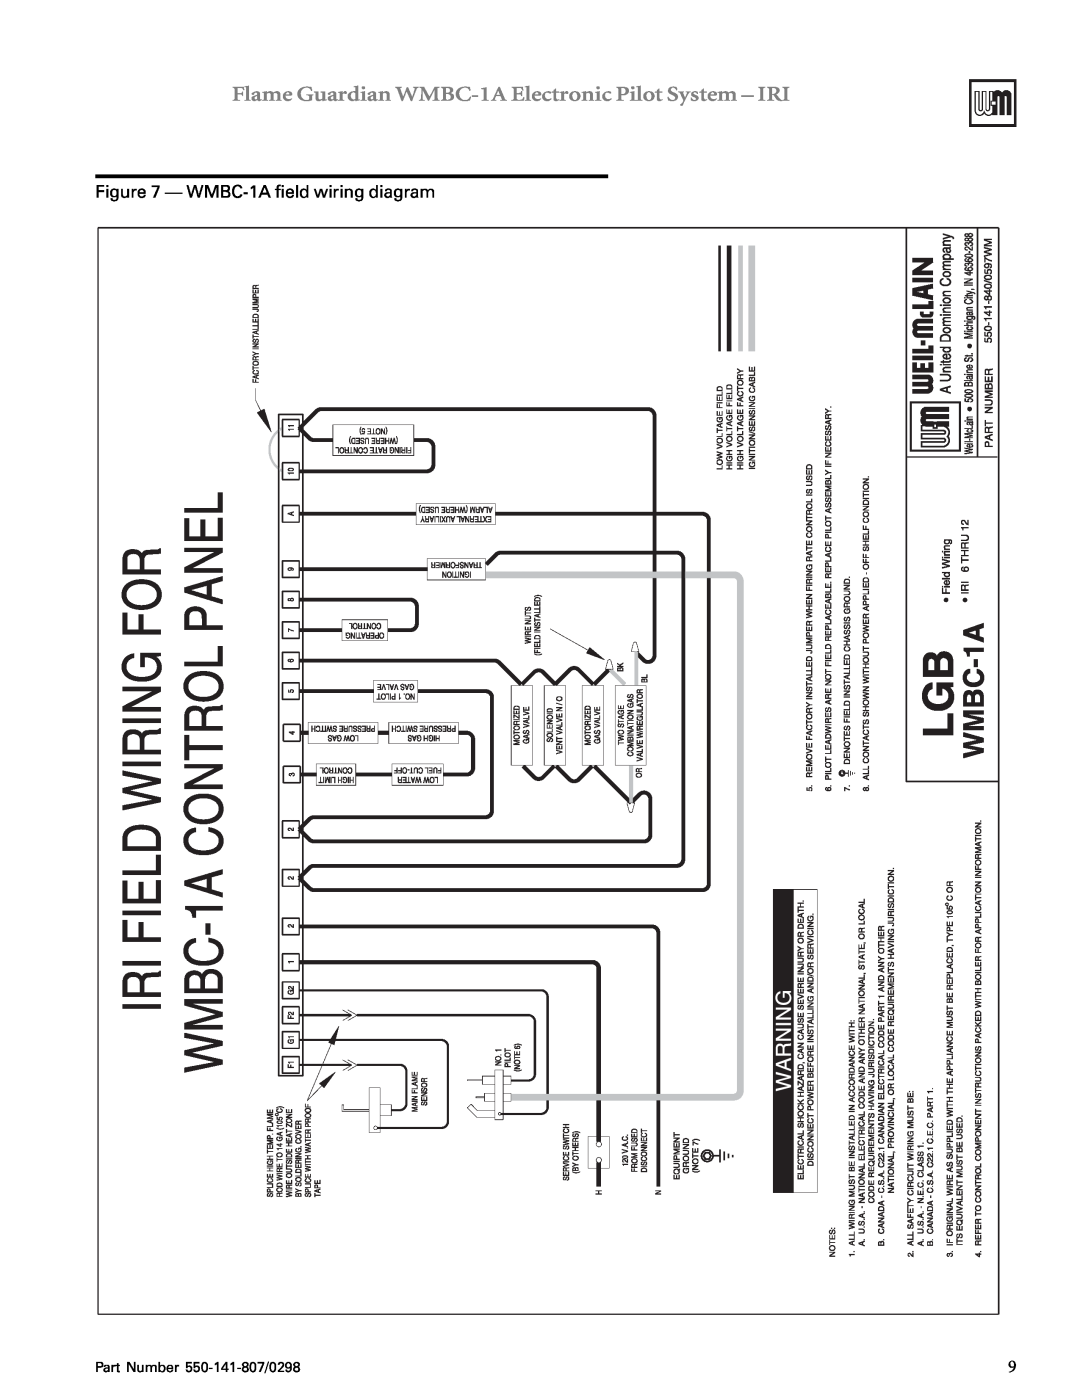 Weil-McLain manual WMBC-1Afield wiring diagram, Part Number 550-141-807/0298 